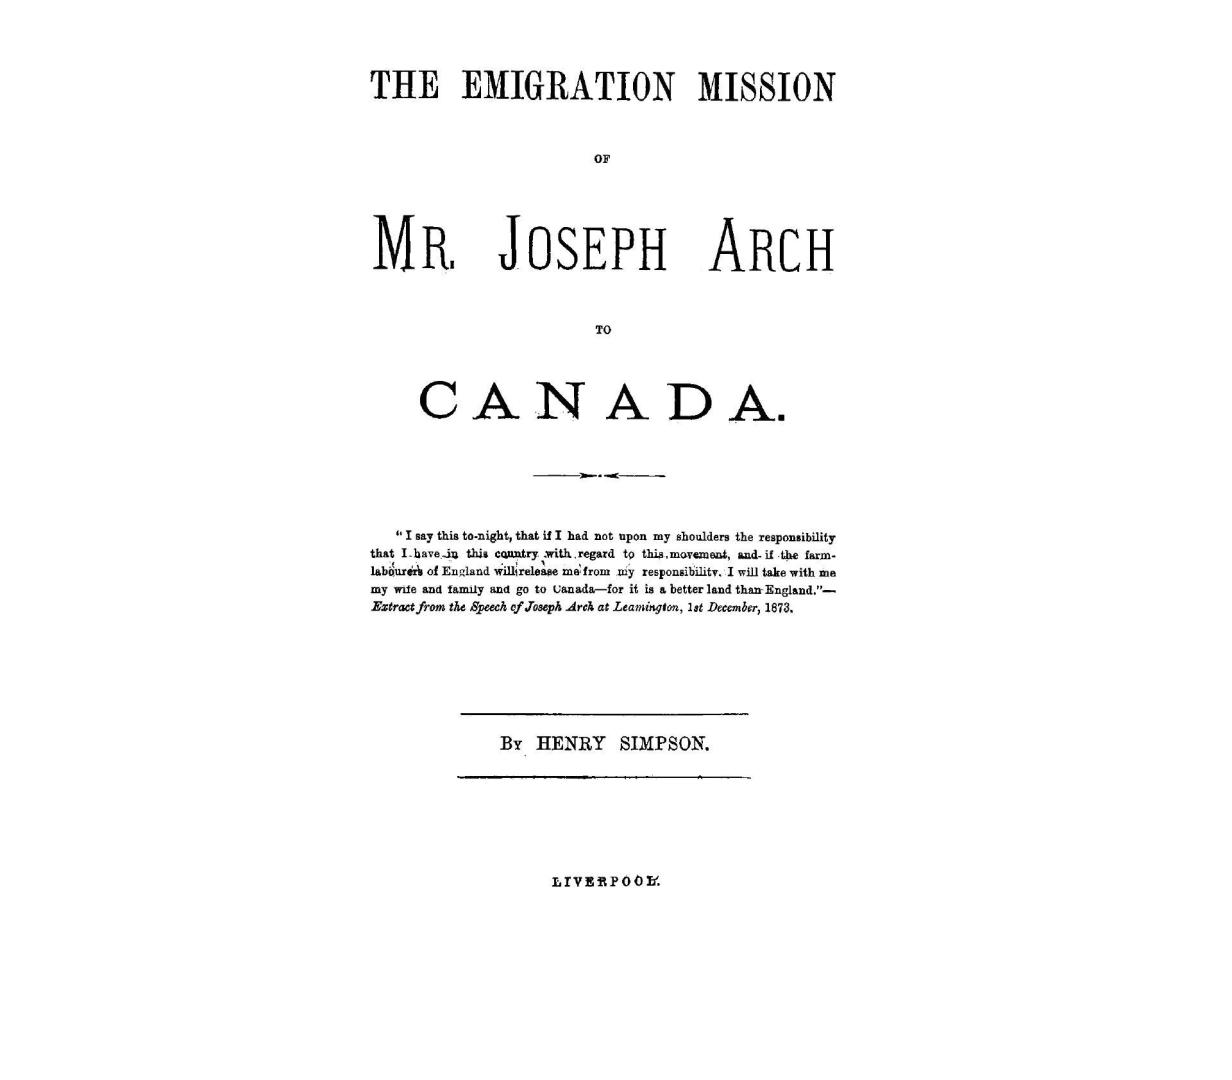 The emigration mission of Mr. Joseph Arch to Canada